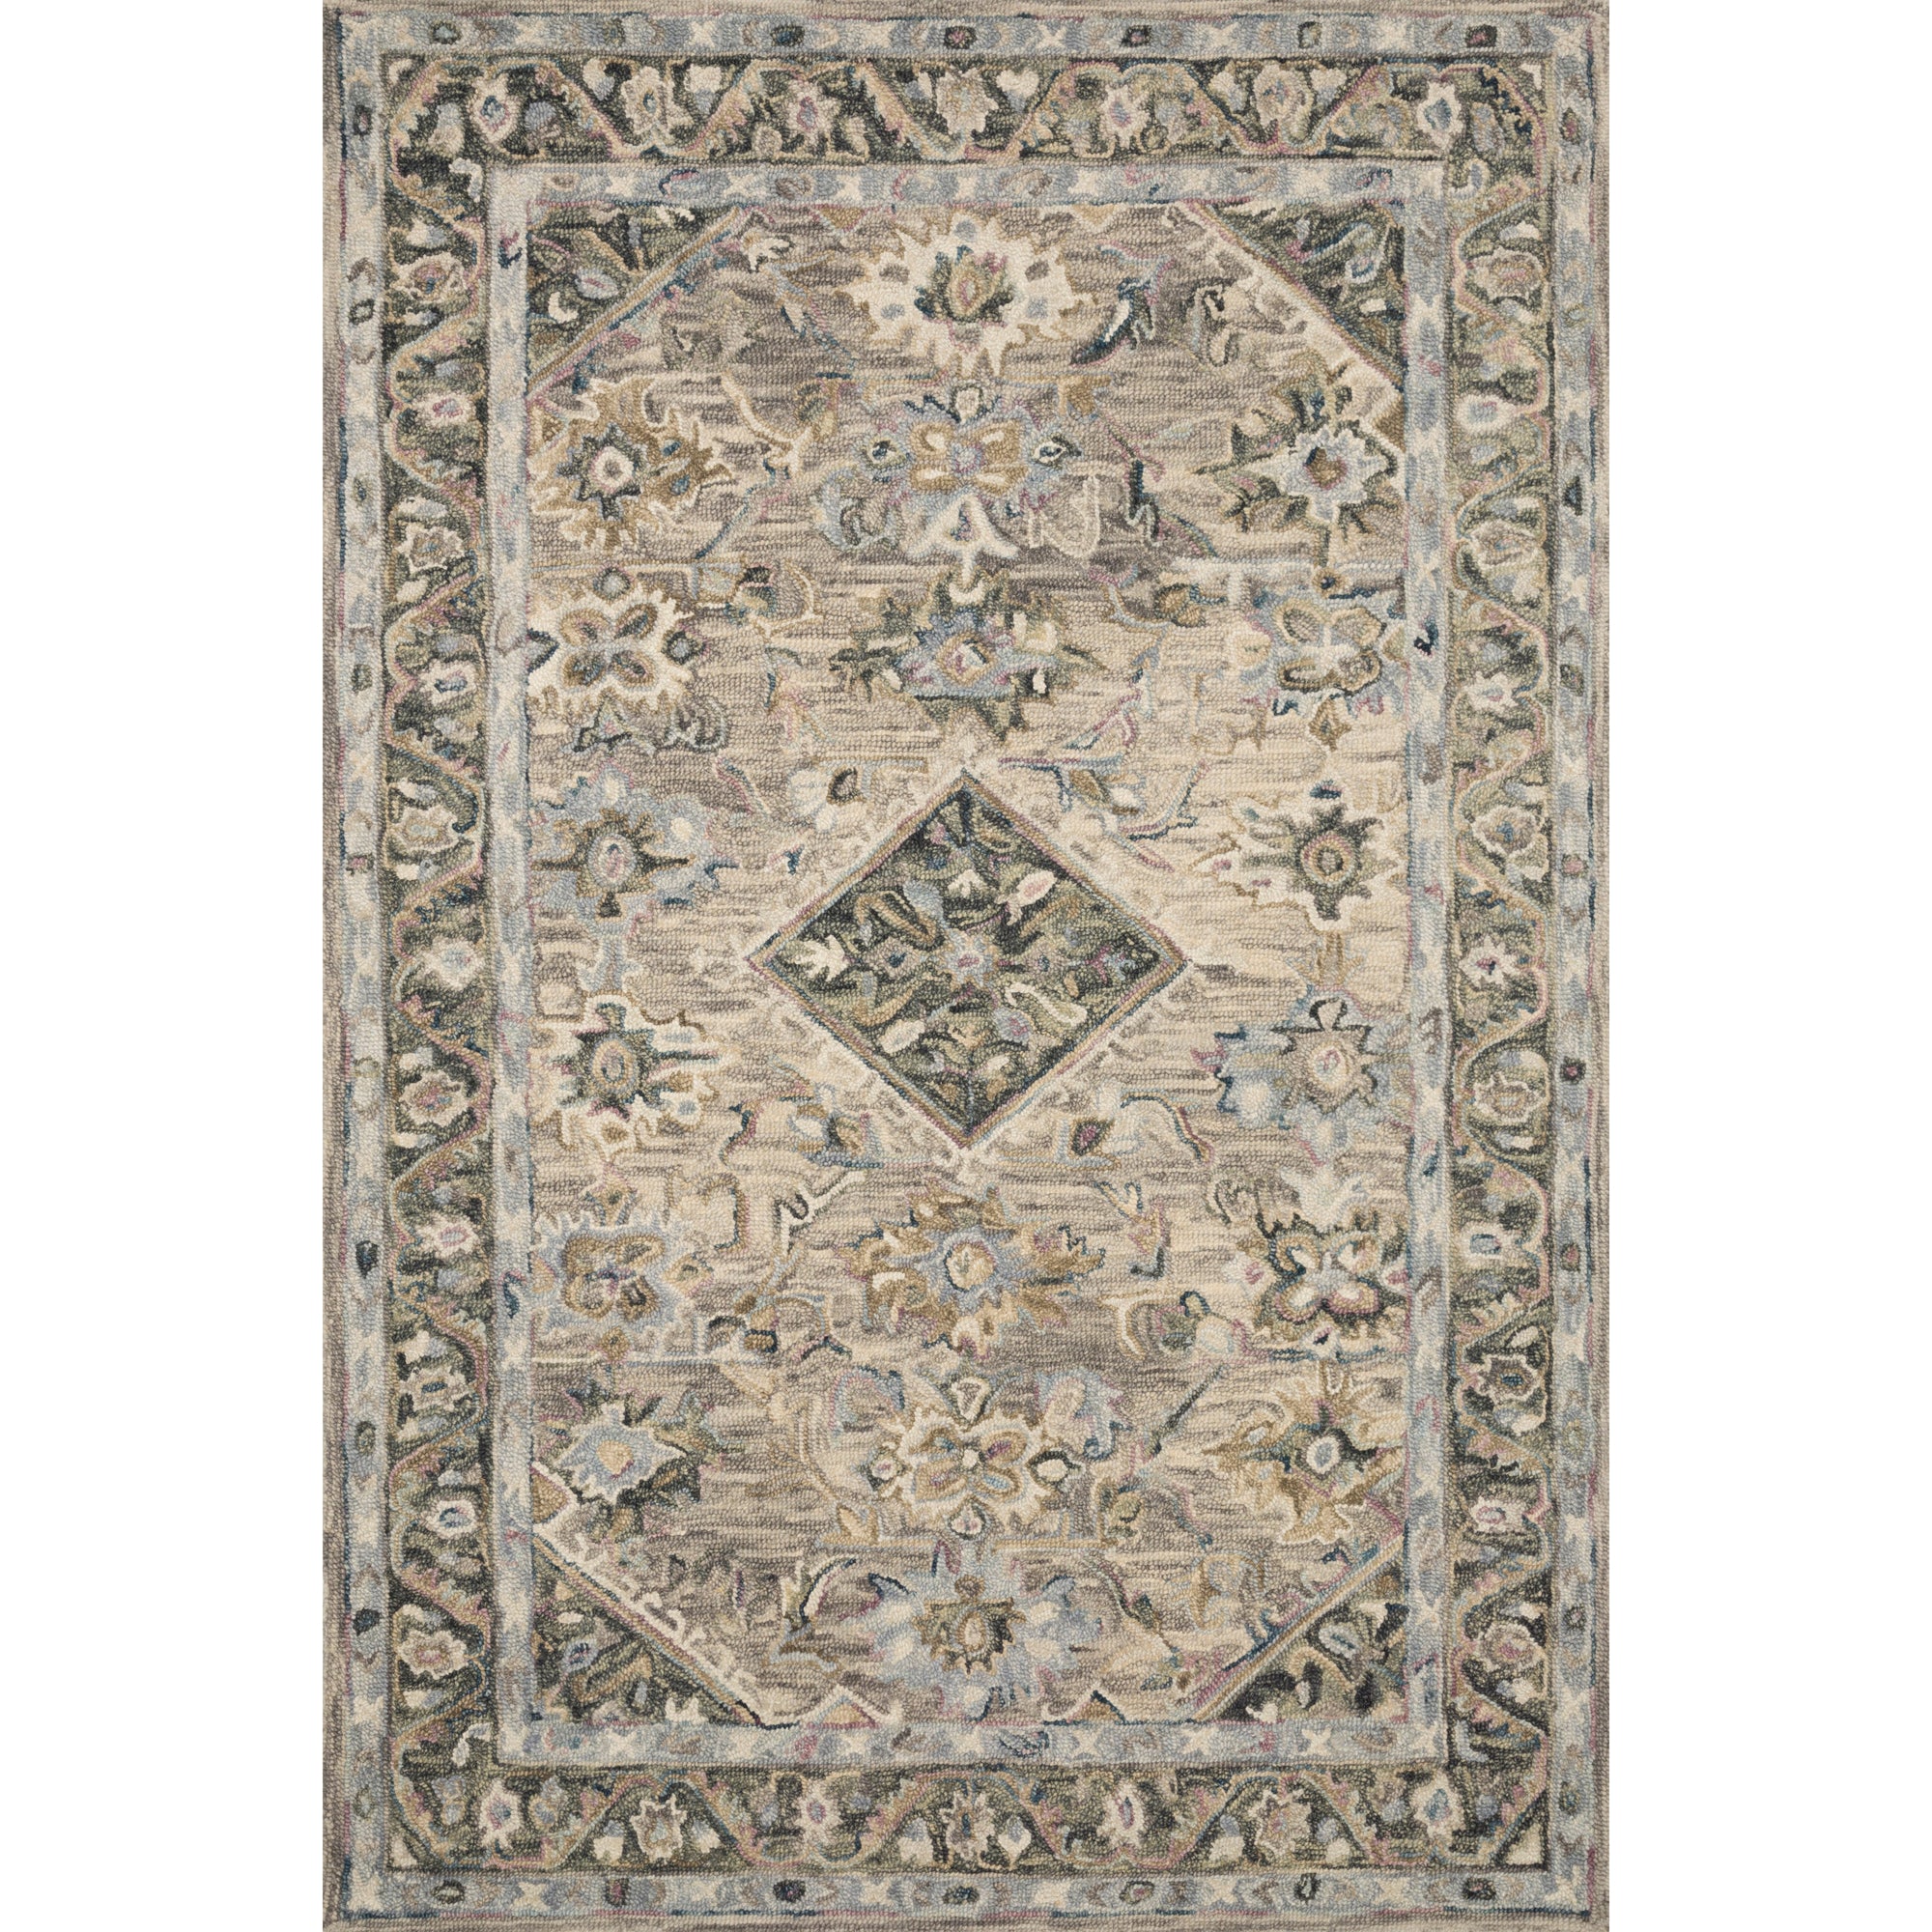 Rugs by Roo Loloi Beatty Sky Multi Area Rug in size 18" x 18" Sample